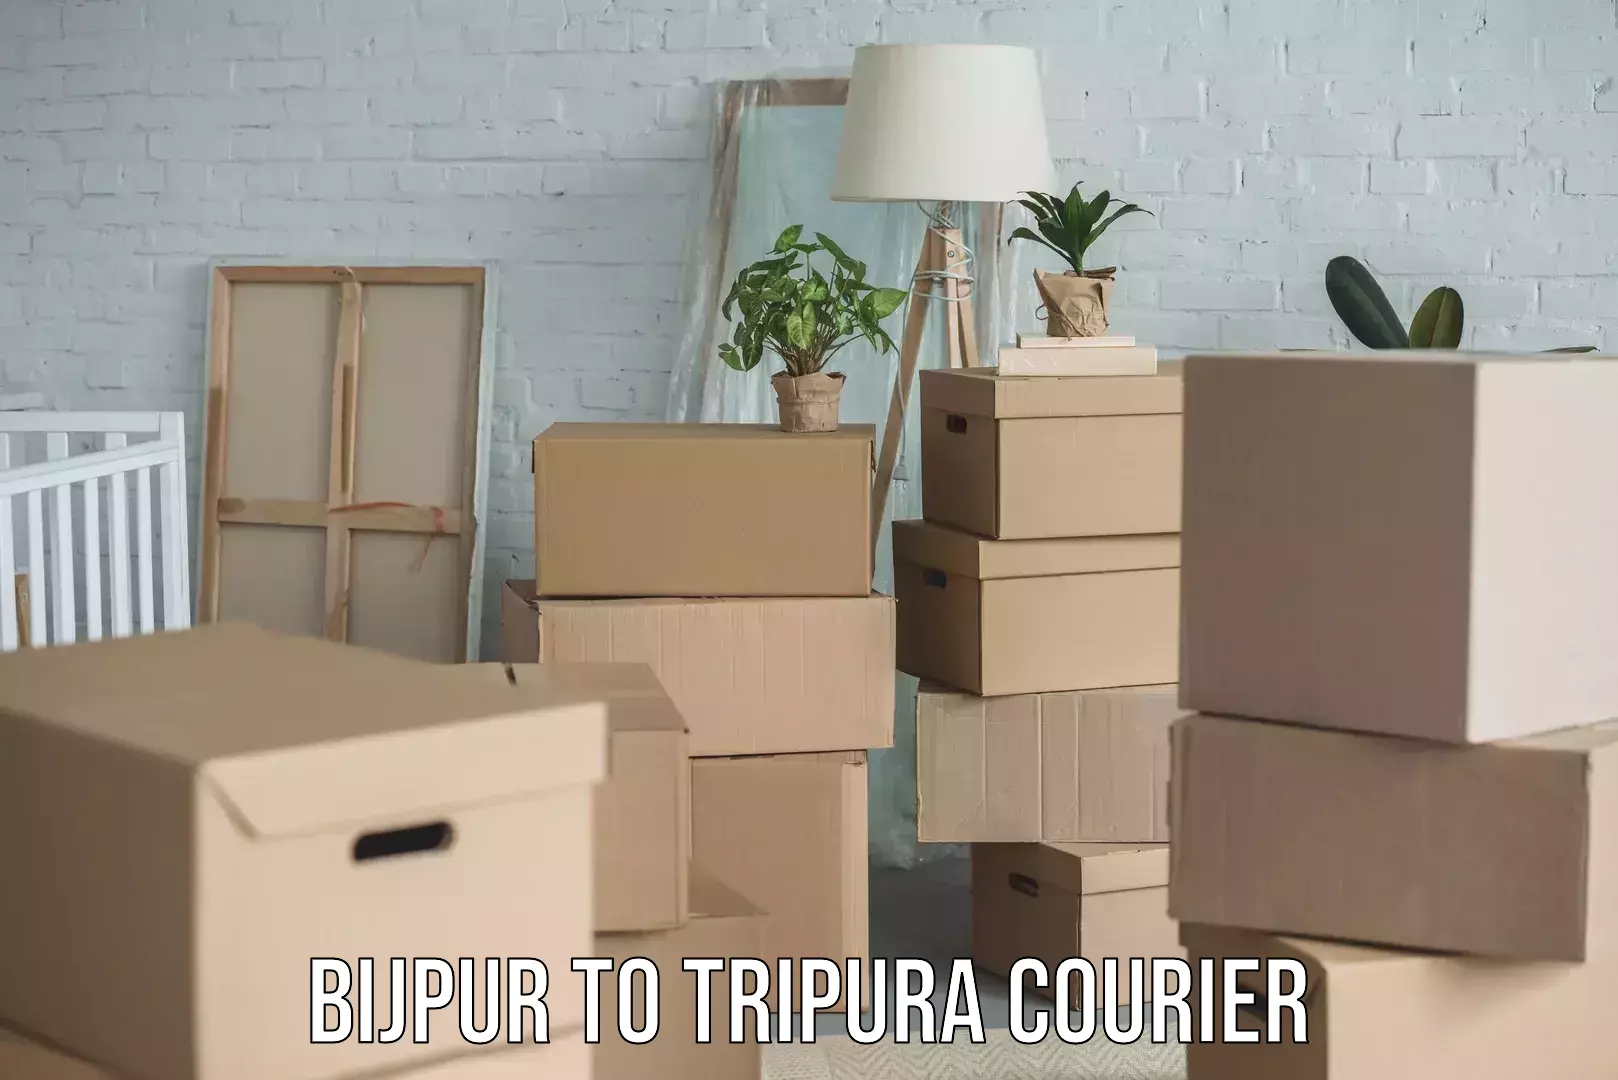 Efficient package consolidation Bijpur to Tripura